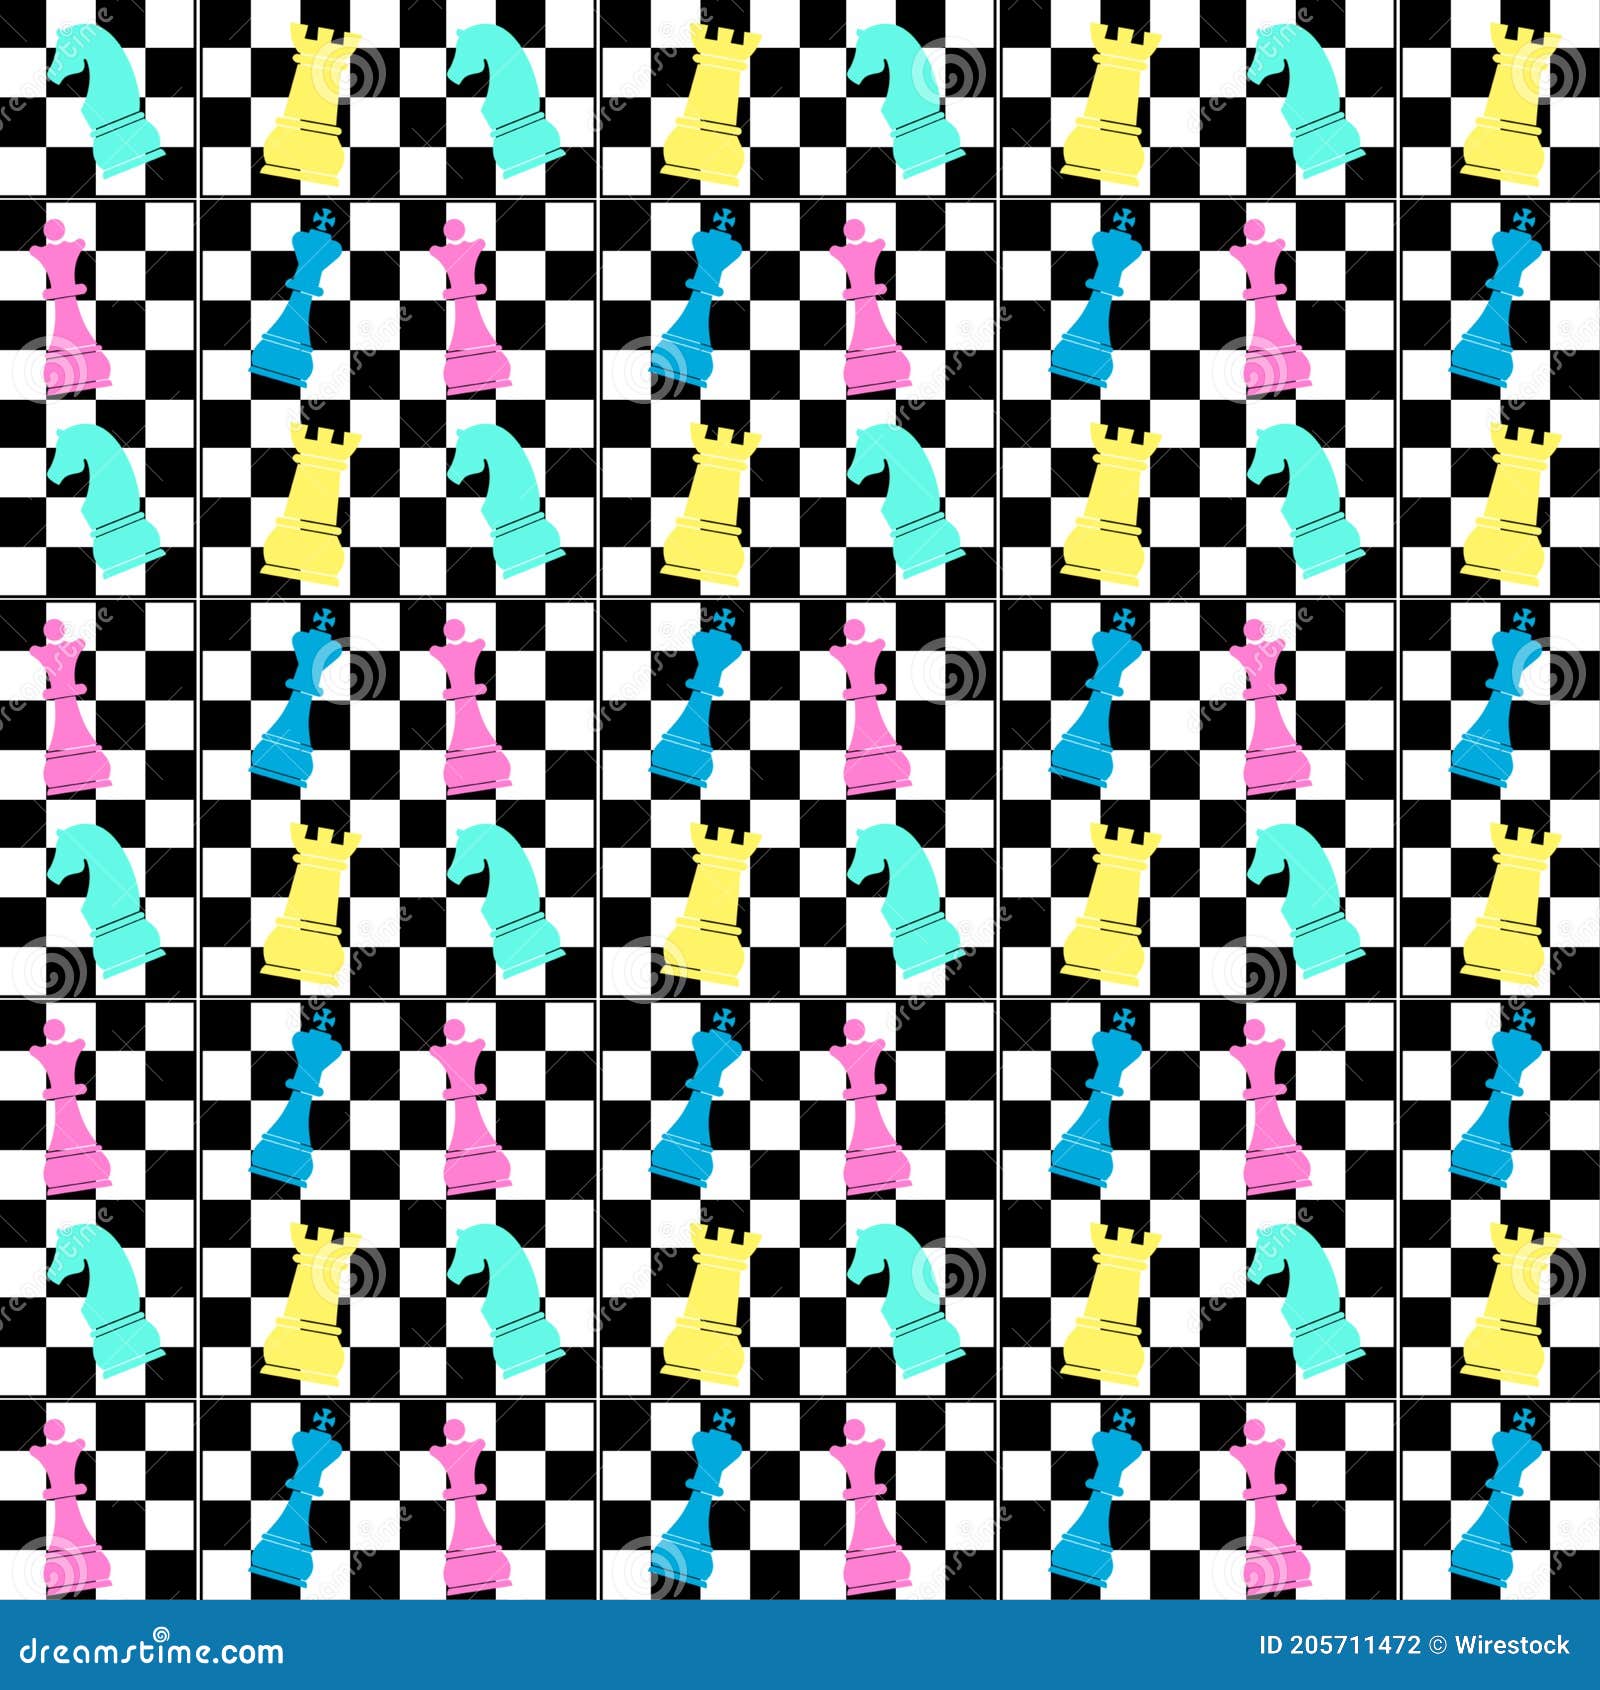 Illustrated Colorful Chess Pieces on a Checkered Background Stock ...